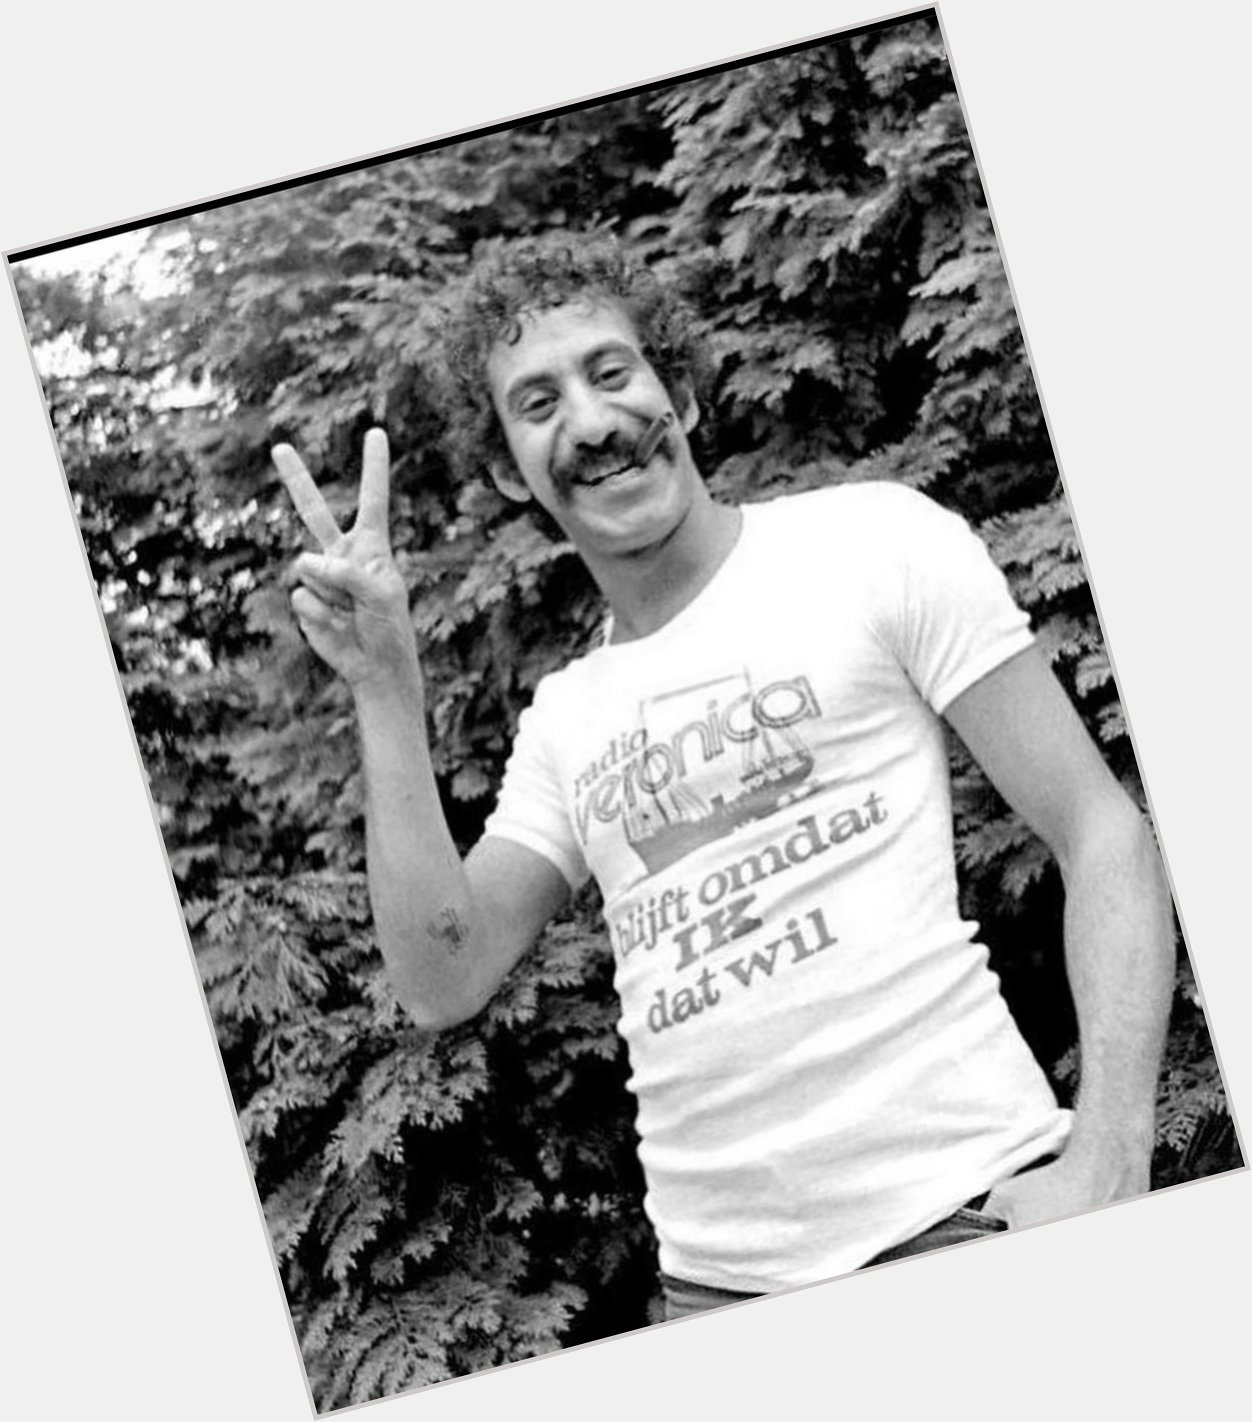 Happy Birthday JIM CROCE.               PEACE to ALL!  